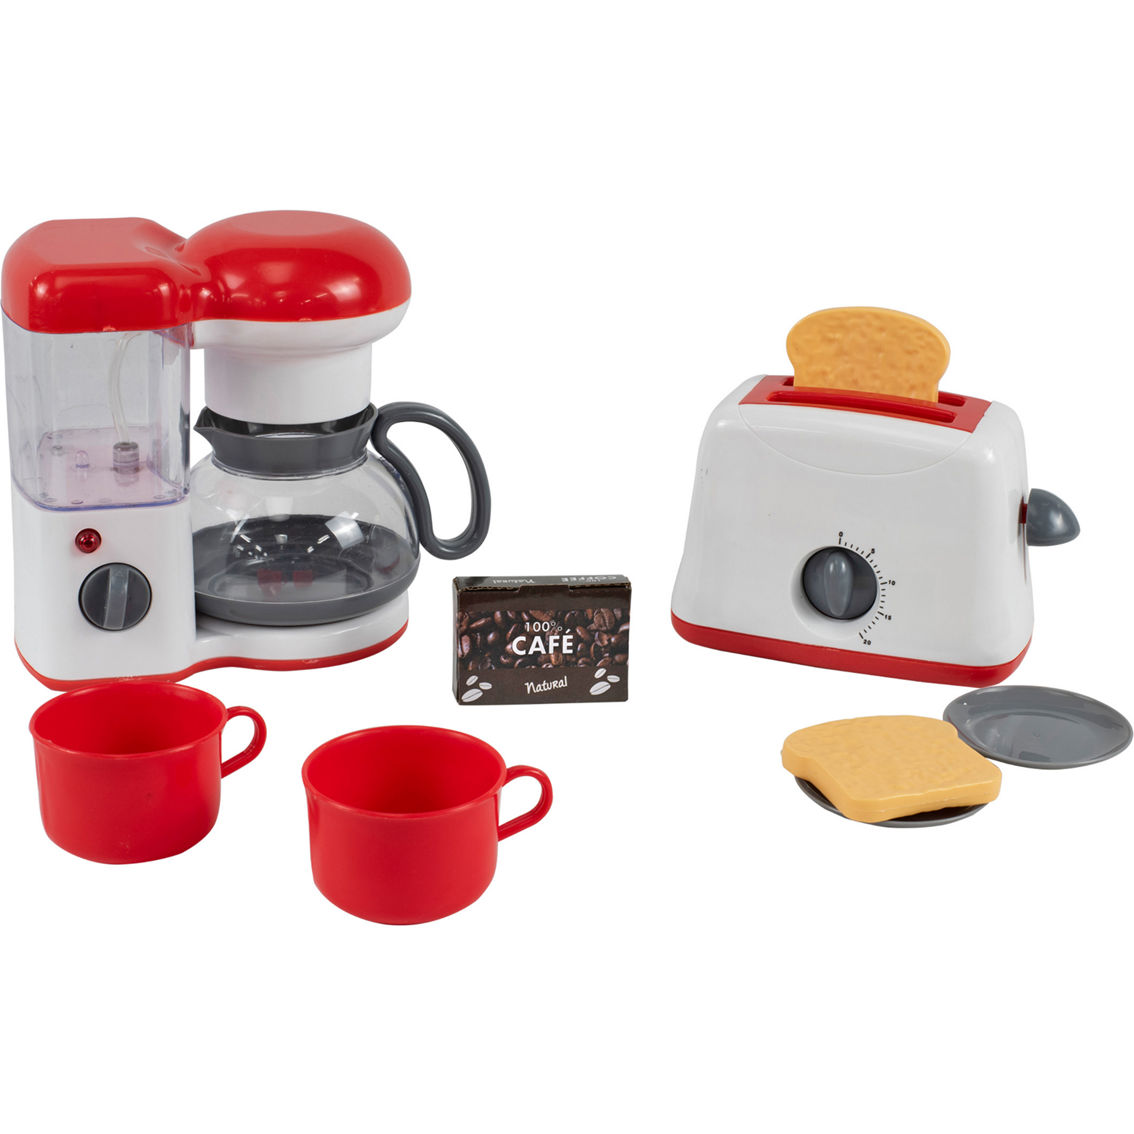 Dollar Queen Deluxe Kitchen Toaster and Coffee Maker Playset - Image 2 of 4